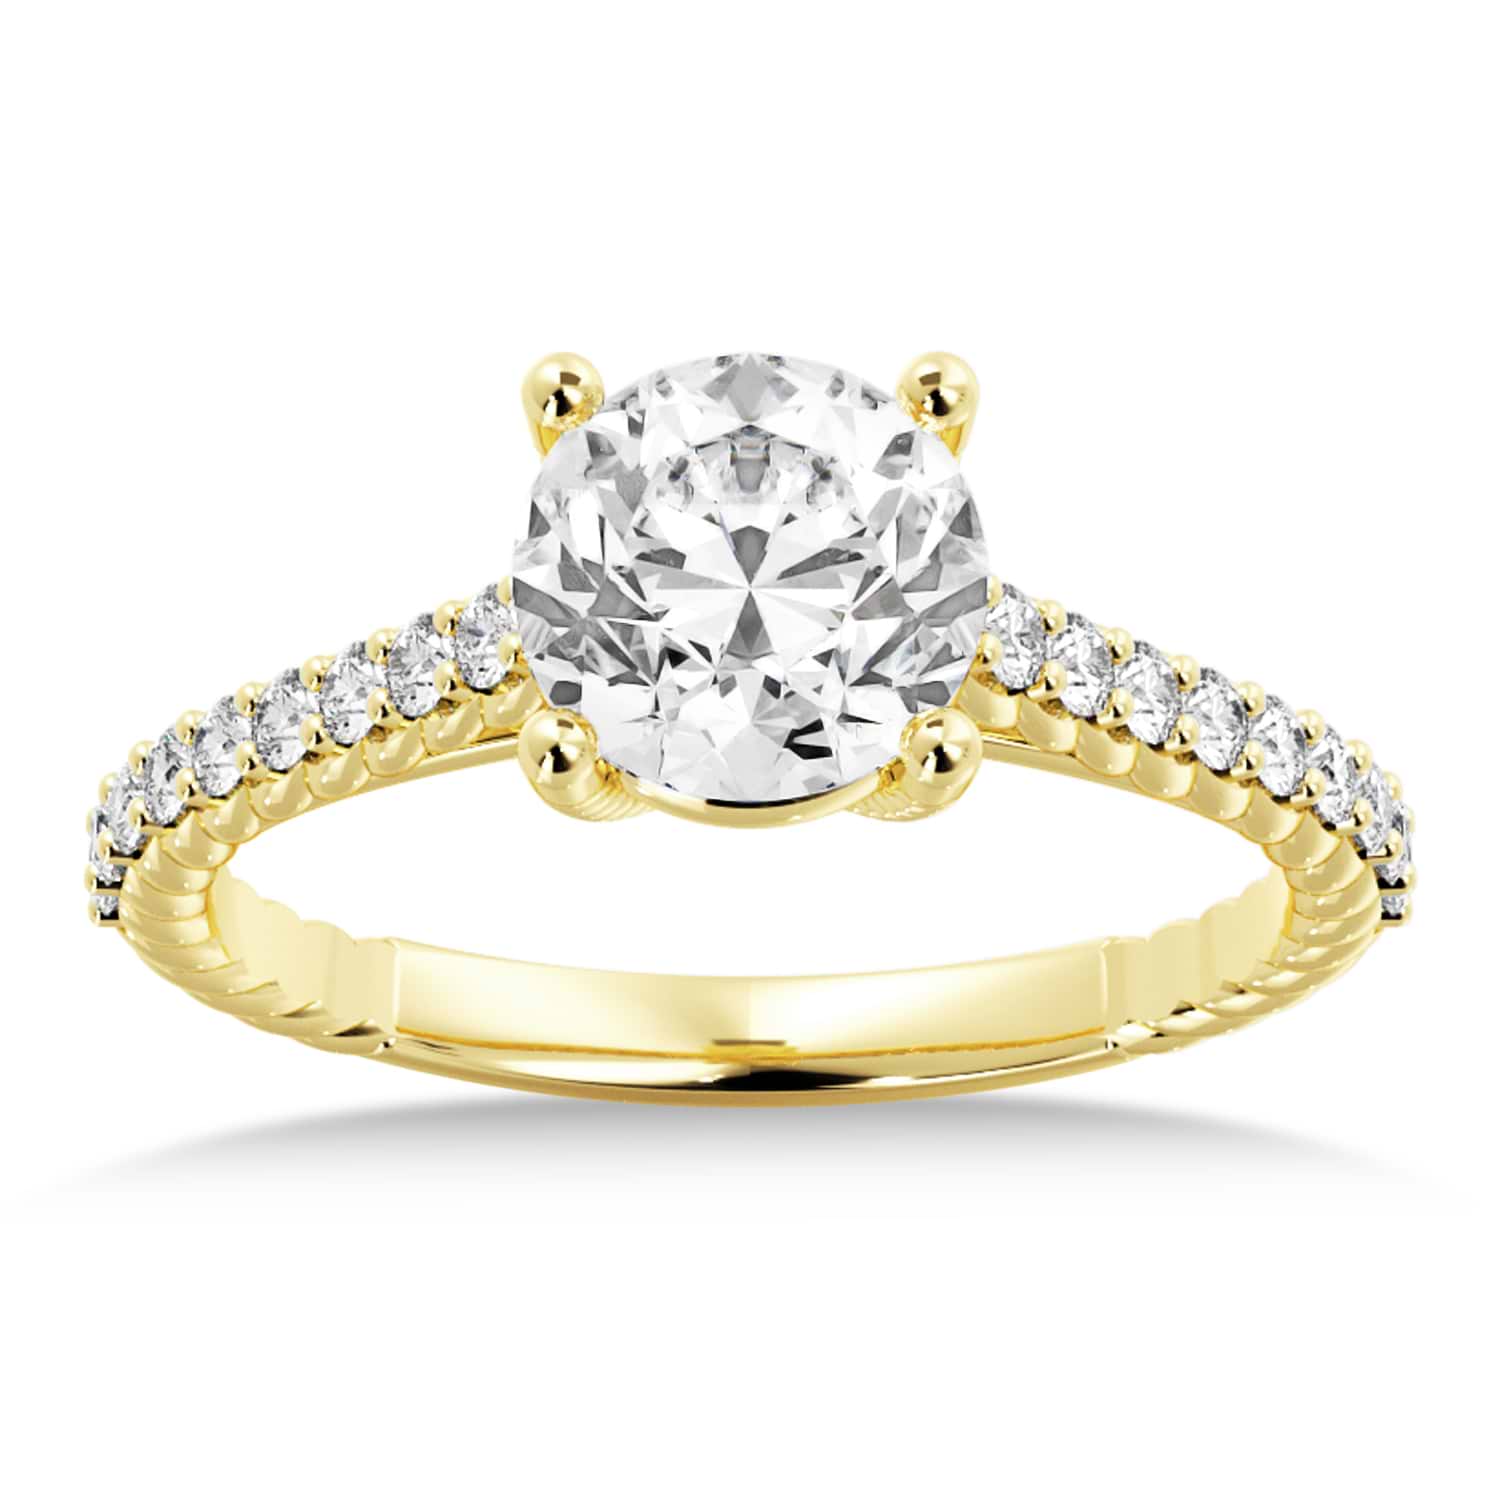 Lab Grown Rope Diamond Accented Engagement Ring 14k Yellow Gold (0.23ct)